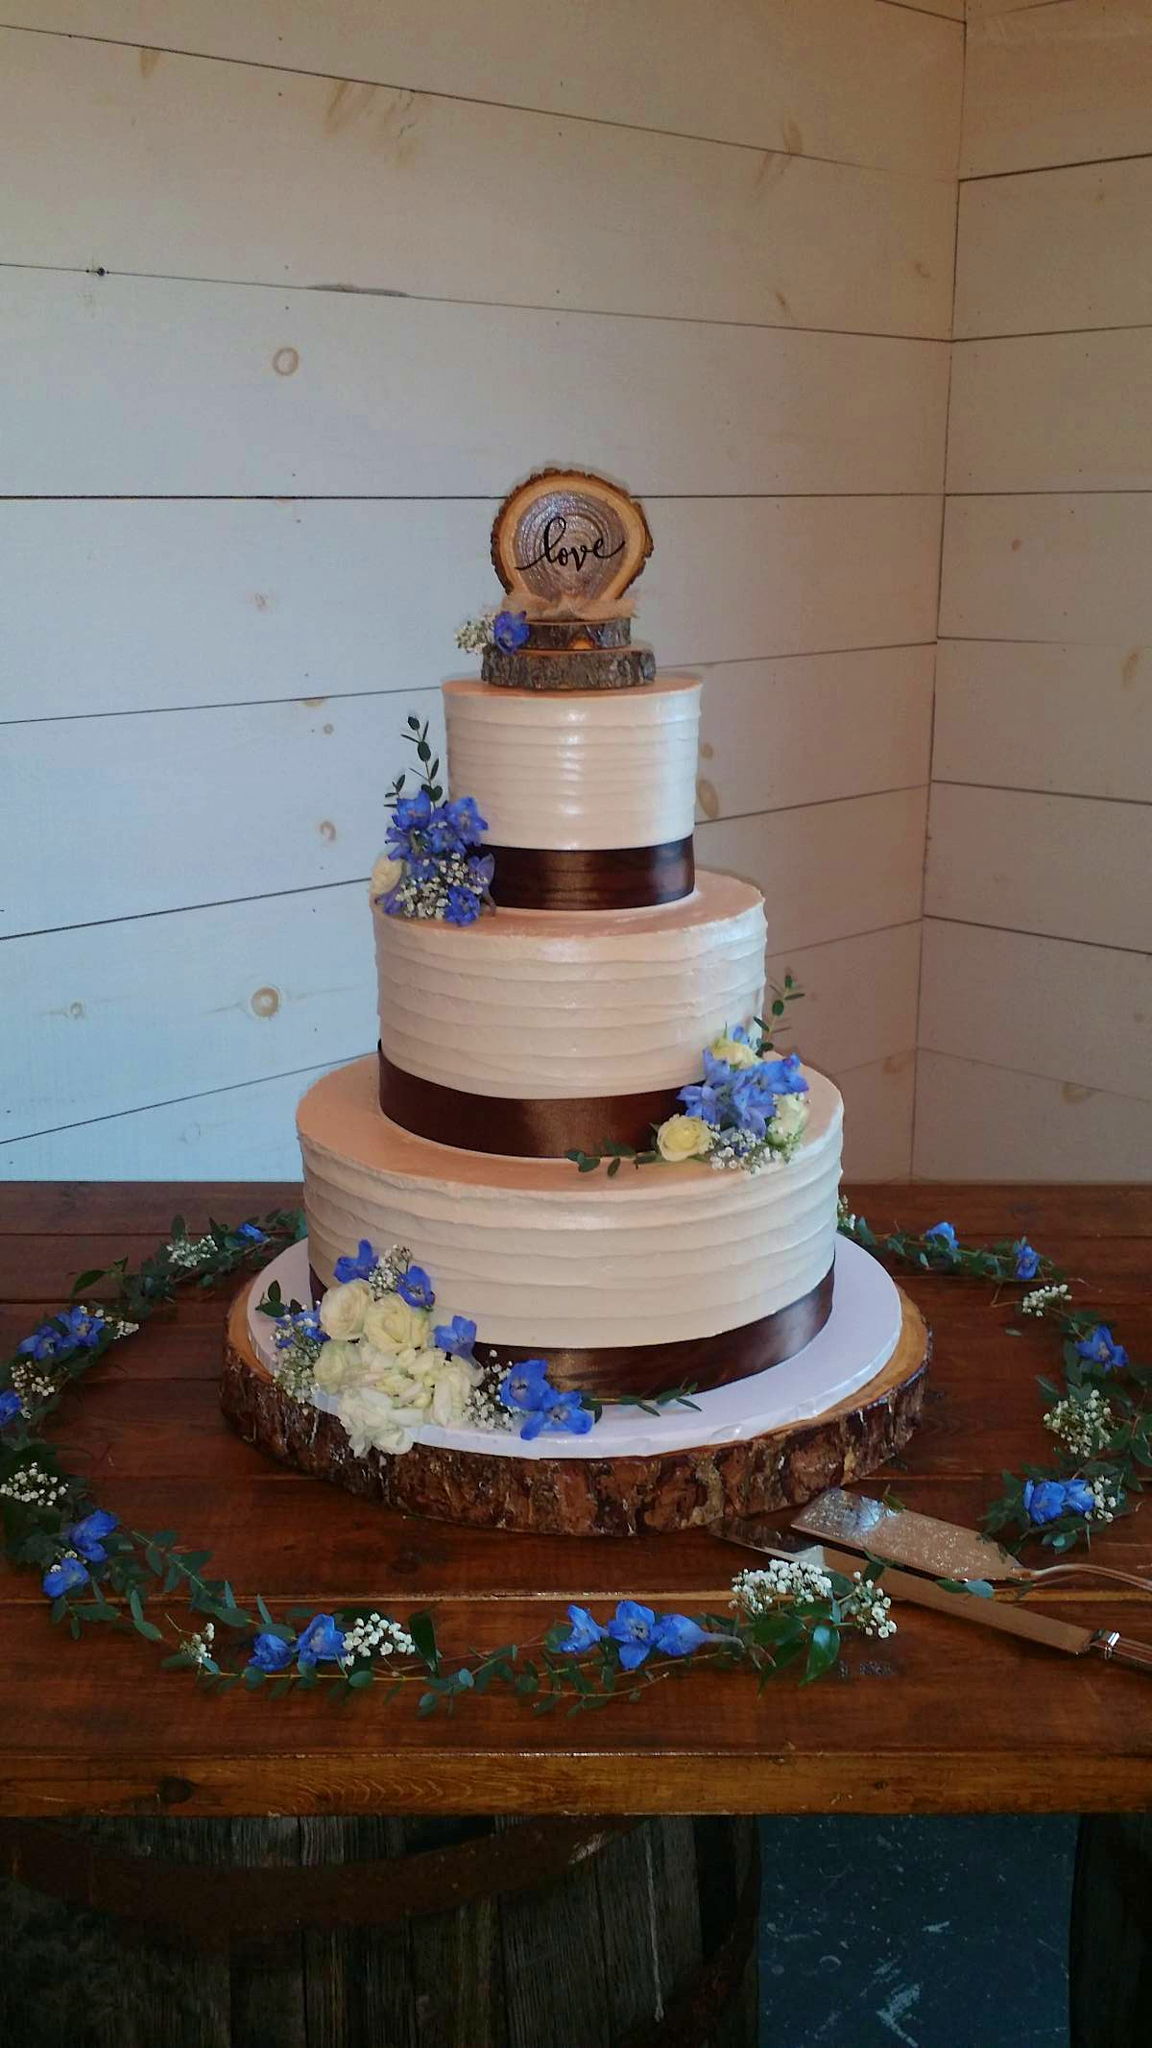 Image for post: Rustic Wedding Cake